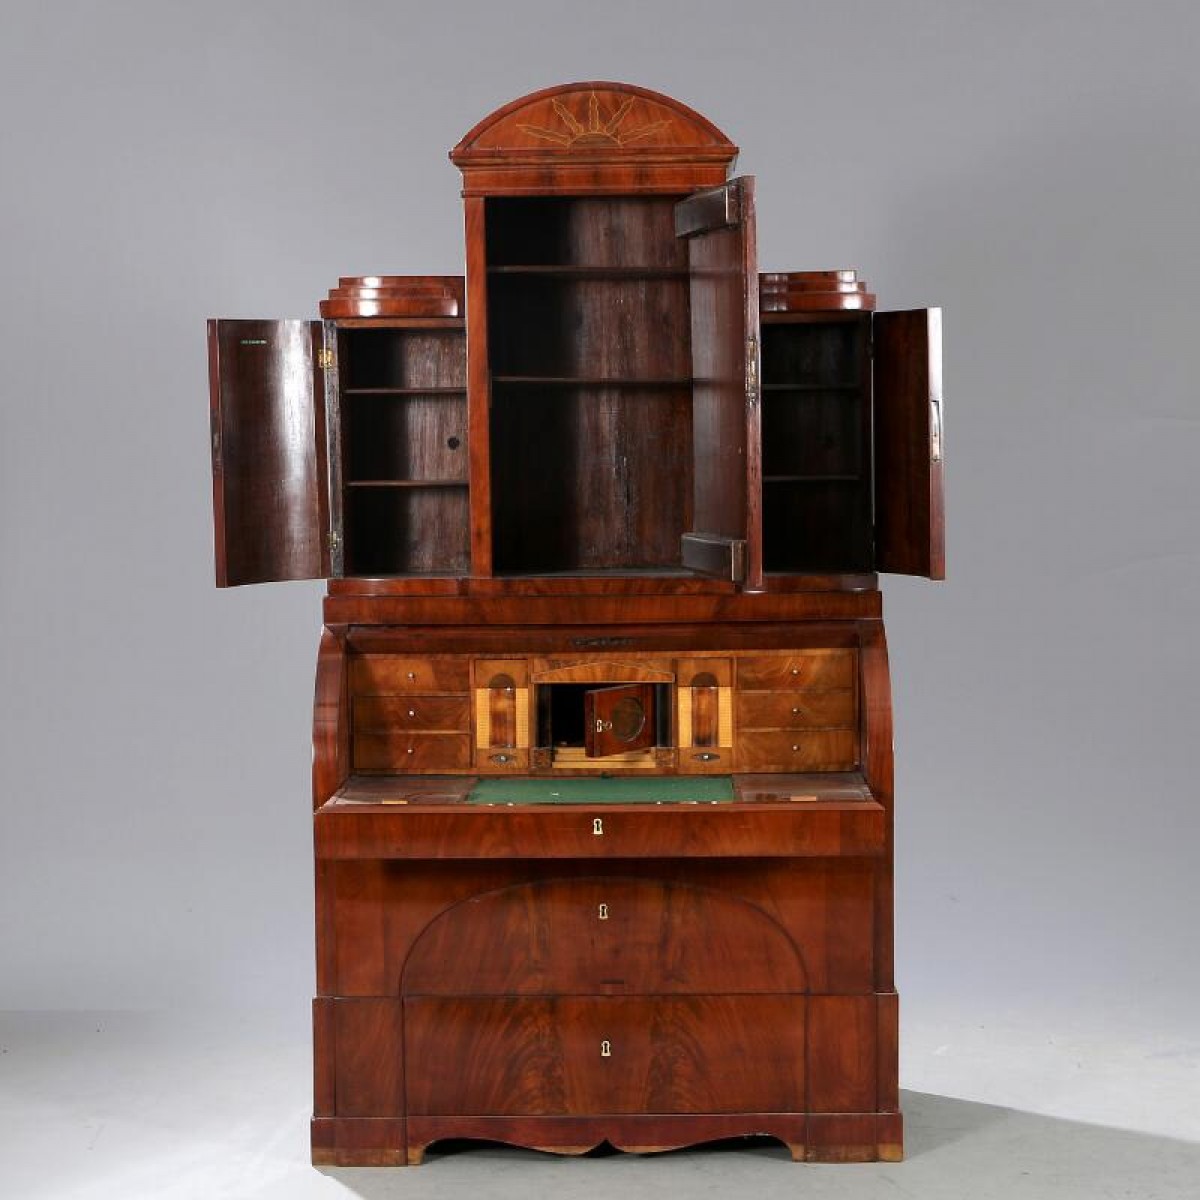 Omdat Lang duizelig Architectural Secretair 2 bodies, Mahogany, Balticum, early 19th cent. -  Ref.94056